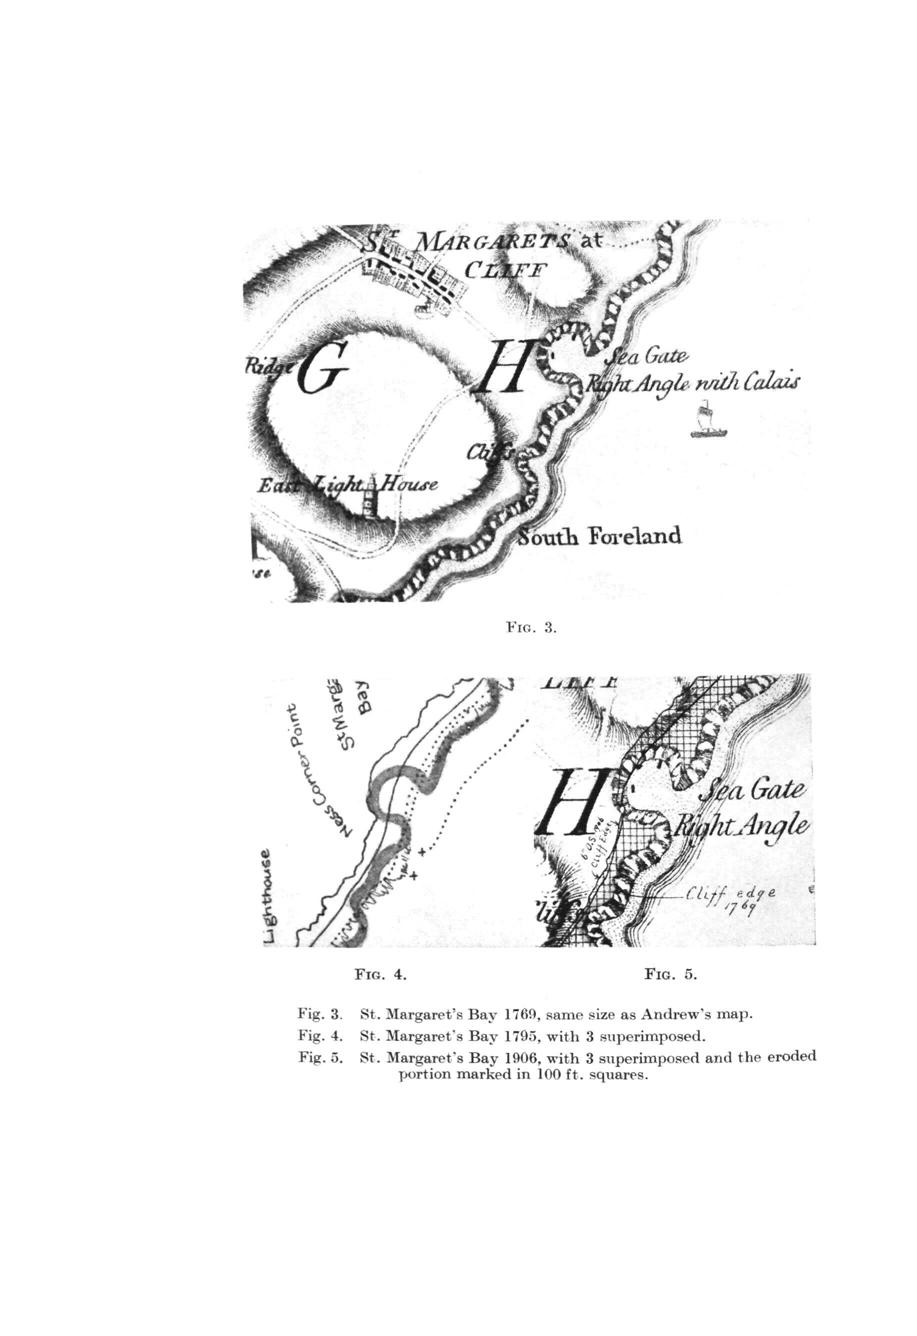 'a Gate- * Angle tvitji Calais 4 oxith Foreland FIG. 3. FIG. 4. Fig. 3. St. Margaret's Bay 1760, same size as Andrew's map. Fig. 4. St. Margaret's Bay 1795, with 3 superimposed.